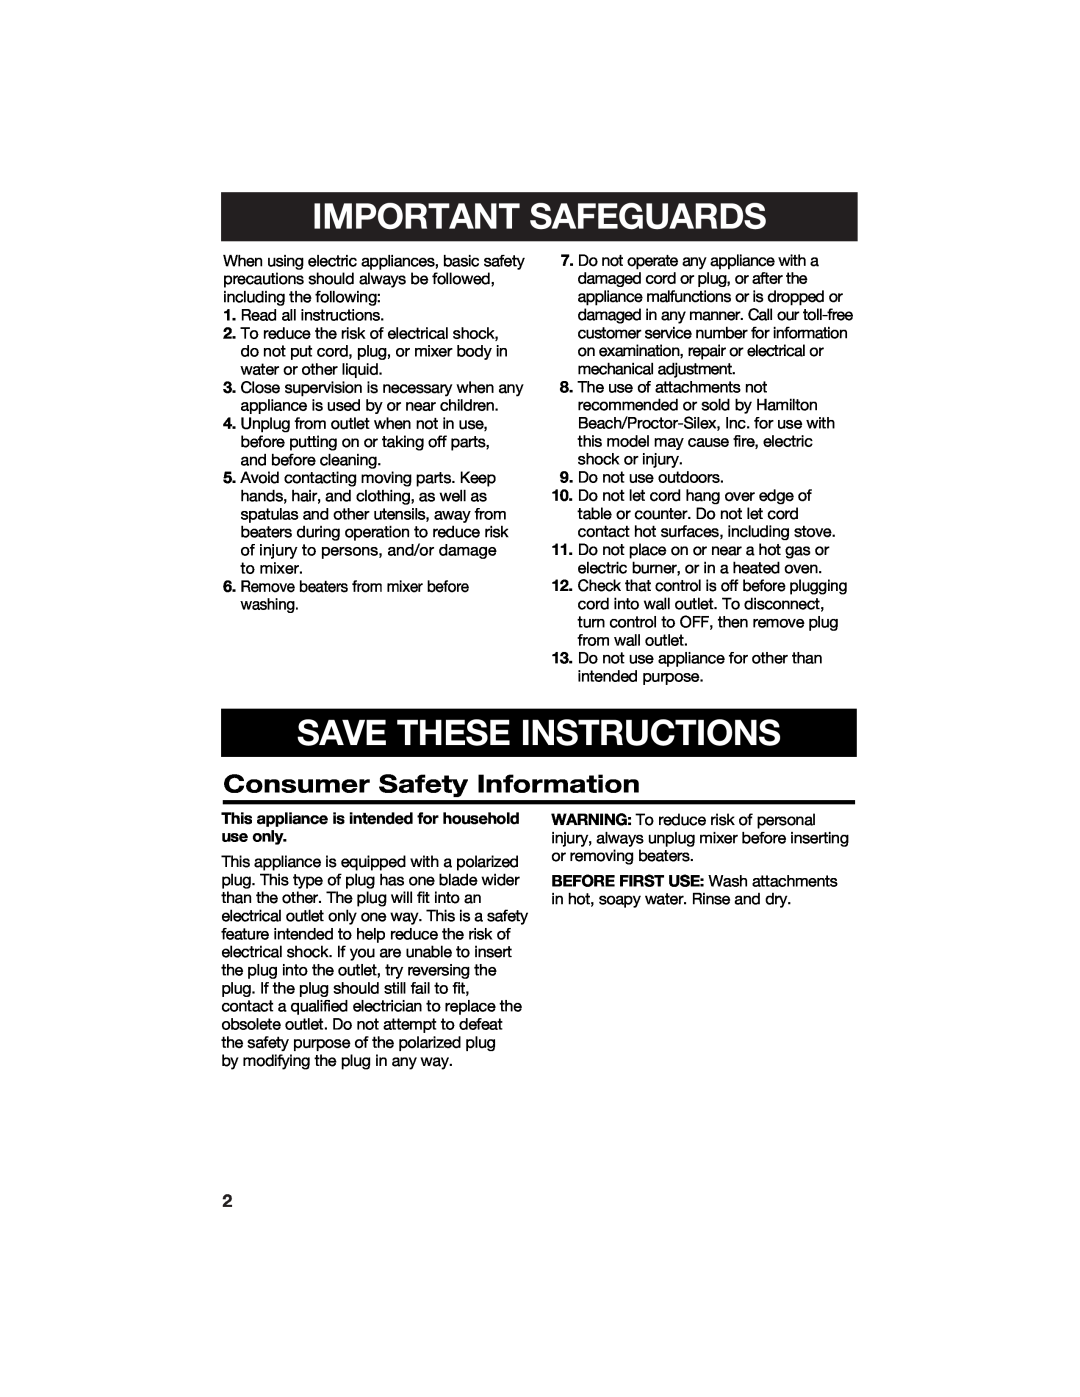 Hamilton Beach 840106200 manual Consumer Safety Information, Important Safeguards, Save These Instructions 